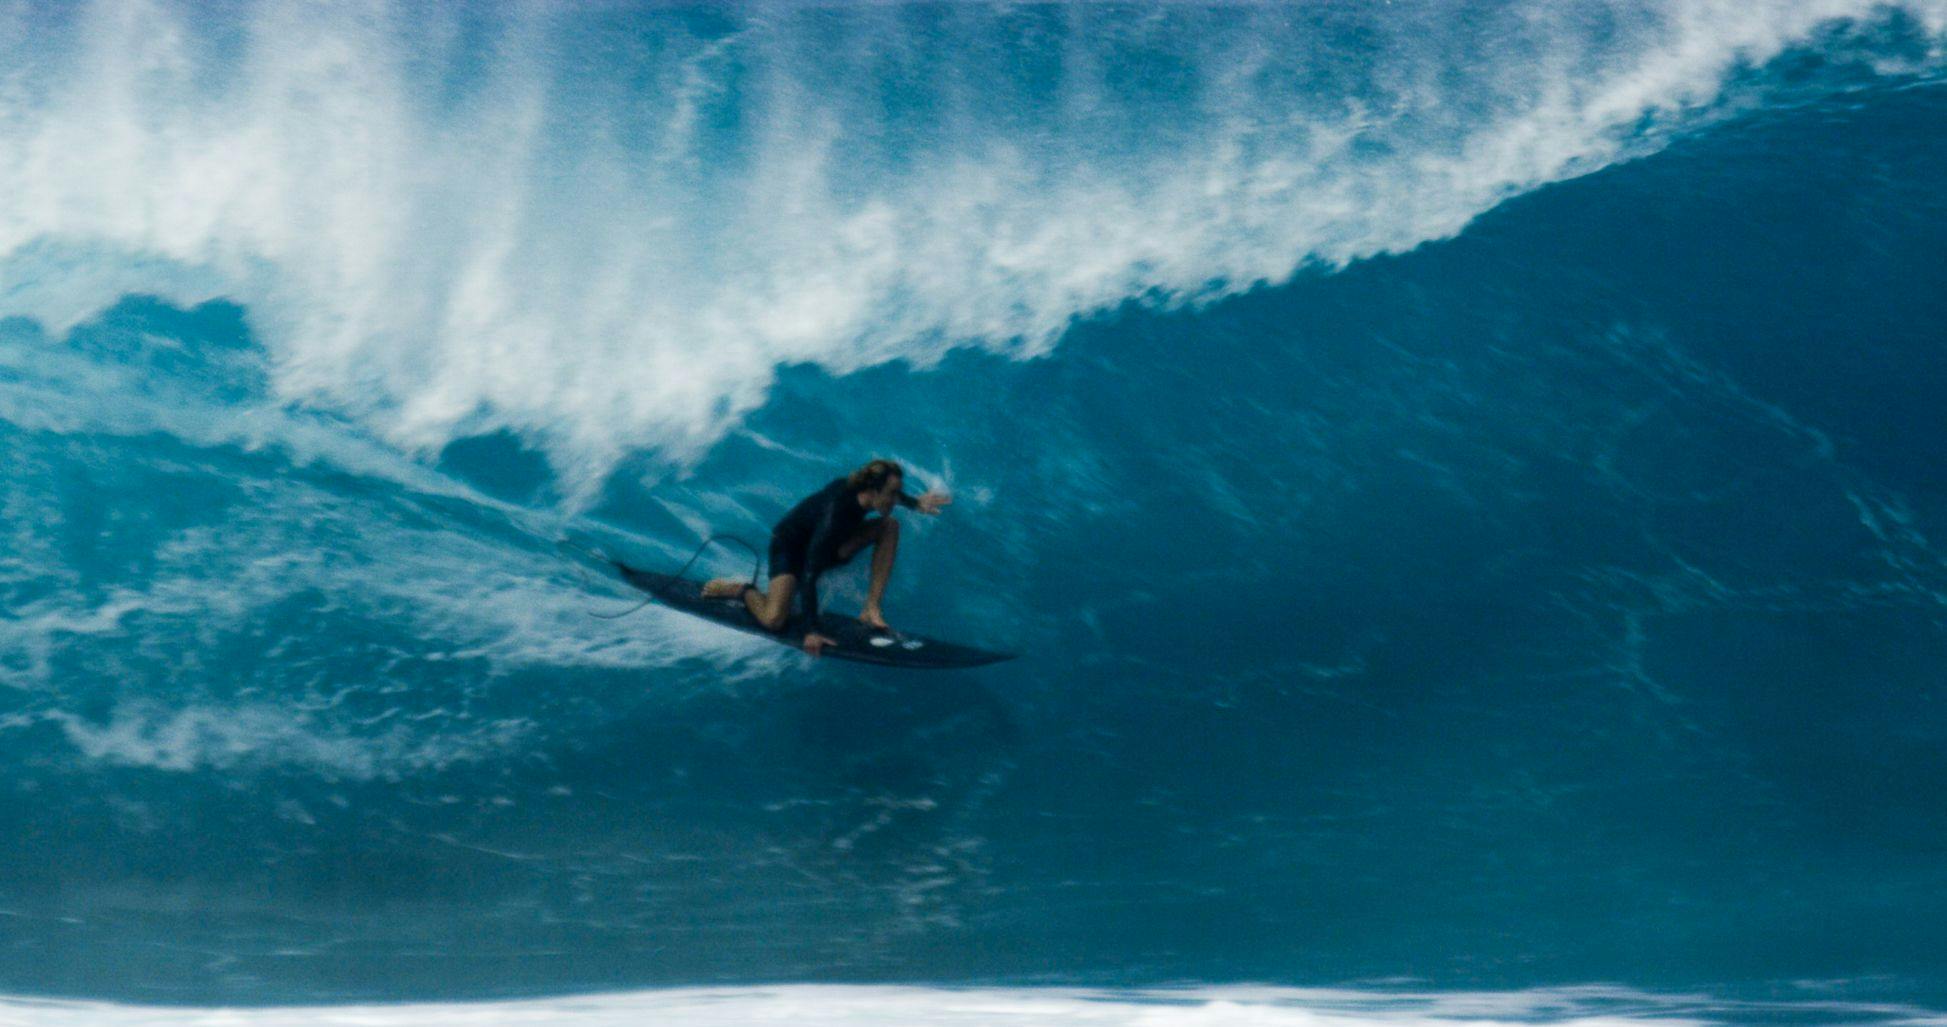 Yours truly on what was a relatively small Pipeline wave for this day.